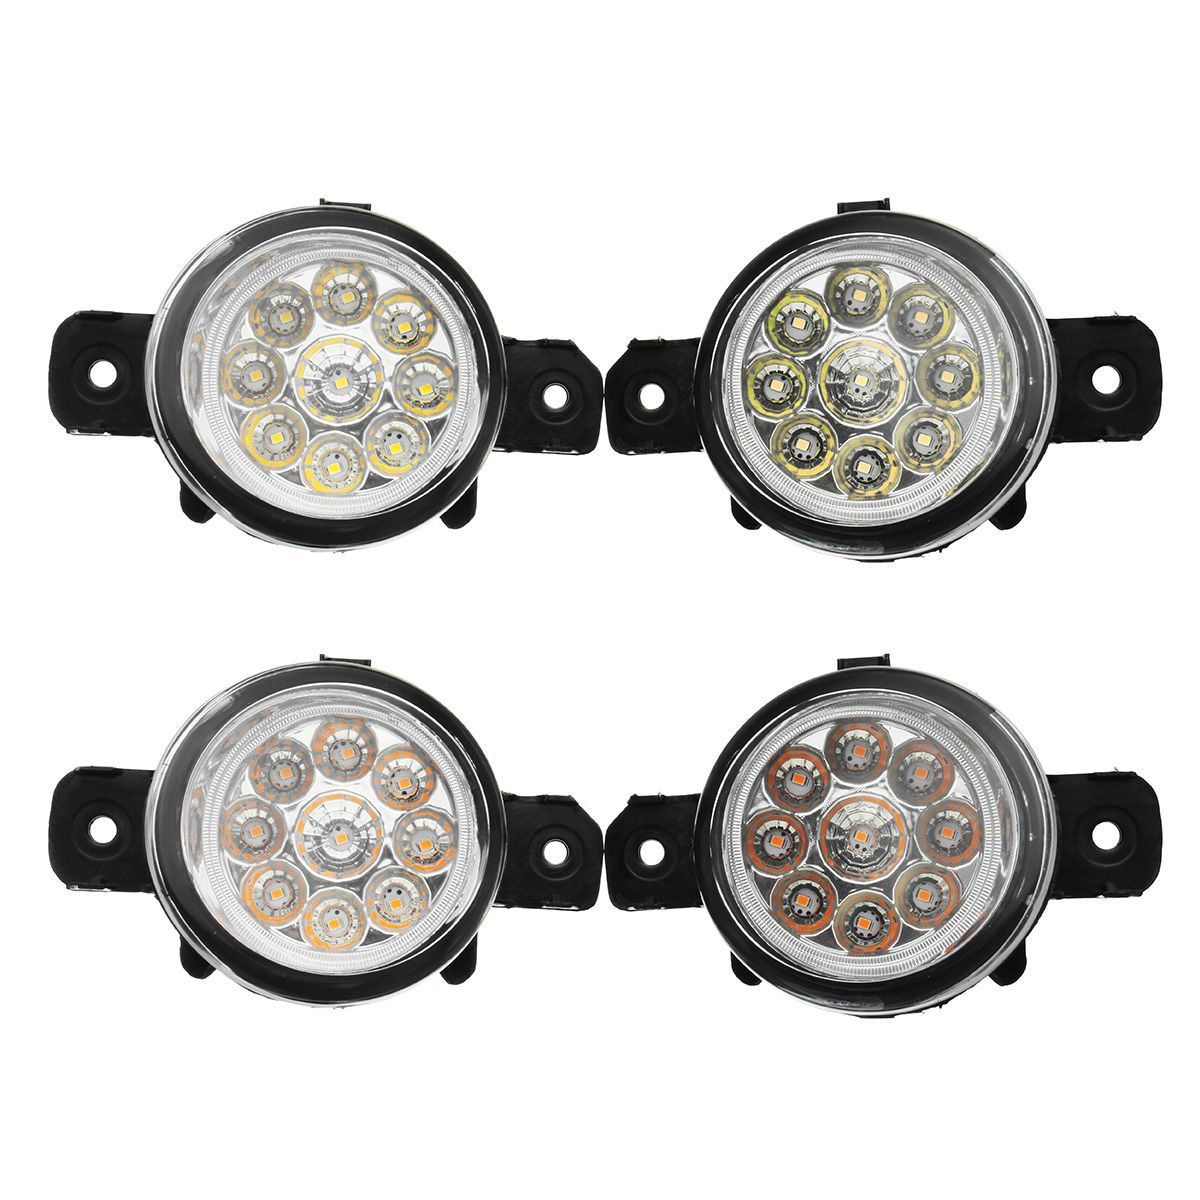 Pair-6W-Car-Front-Fog-Lights-with-H11-bulb-for-Nissan-Altima-Maxima-Rogue-Sentra-YellowWhite-1363729